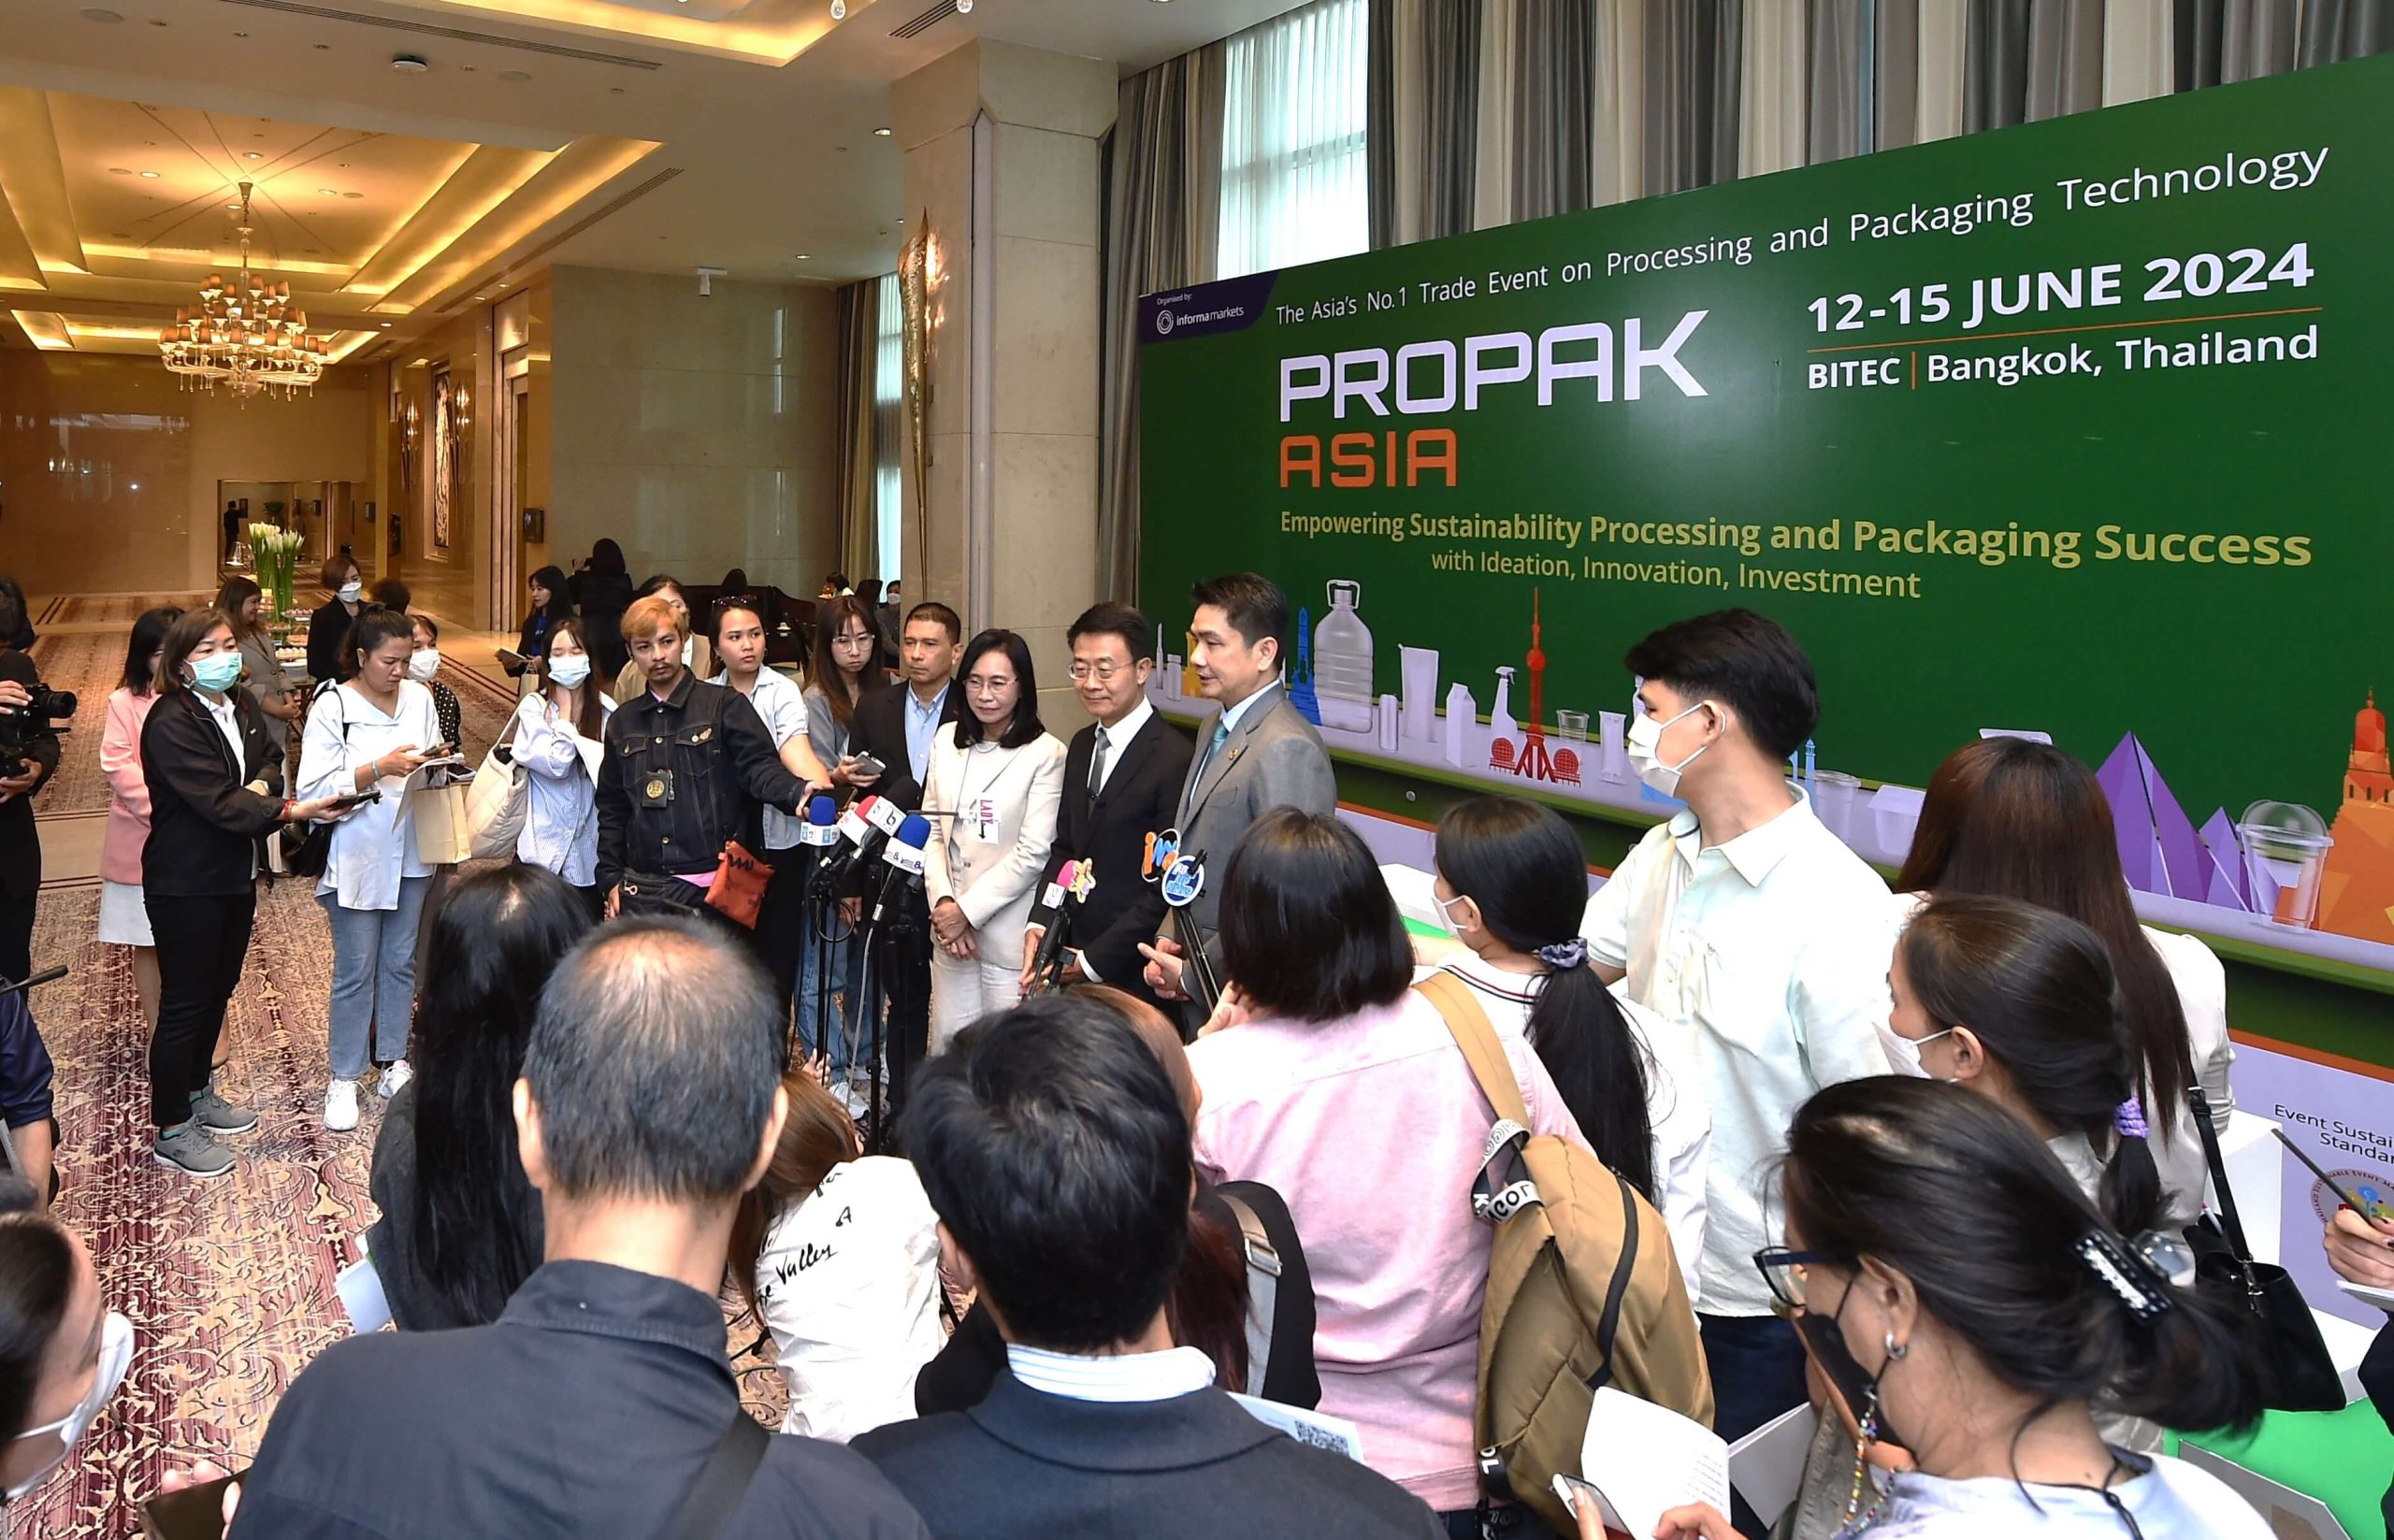 TISTR, the Federation of Thai Industries, the Thai Chamber of Commerce, and Informa Markets are collaborating to enhance the strength and value of Thailand’s food and beverage export products. They are showcasing ProPak Asia 2024 as a hub for global manufacturing innovations and trends.